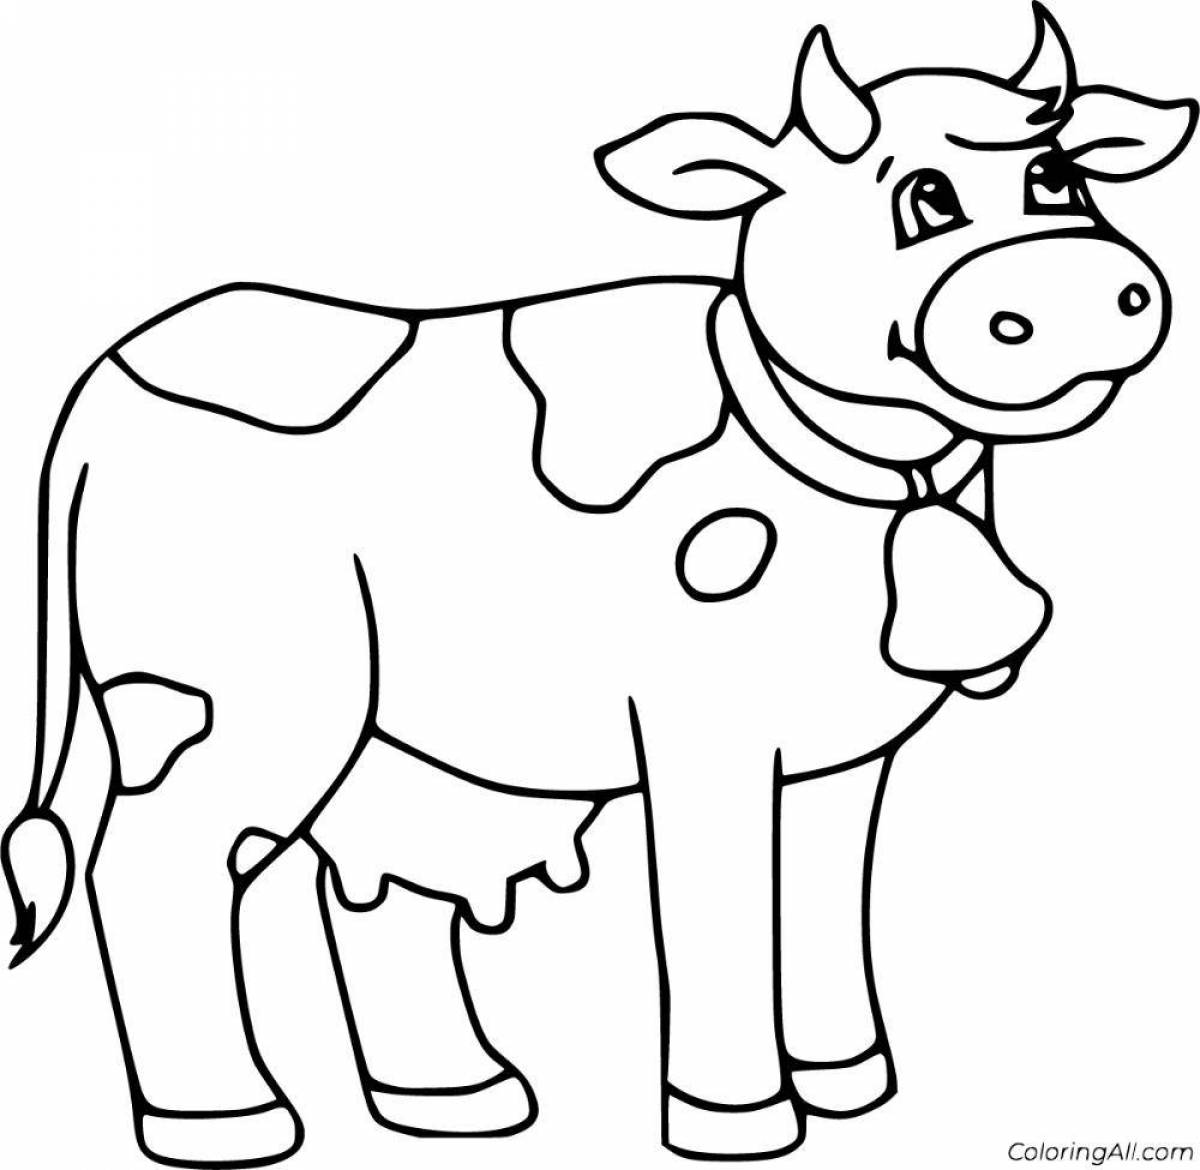 Outstanding cow coloring book for toddlers 2 3 years old